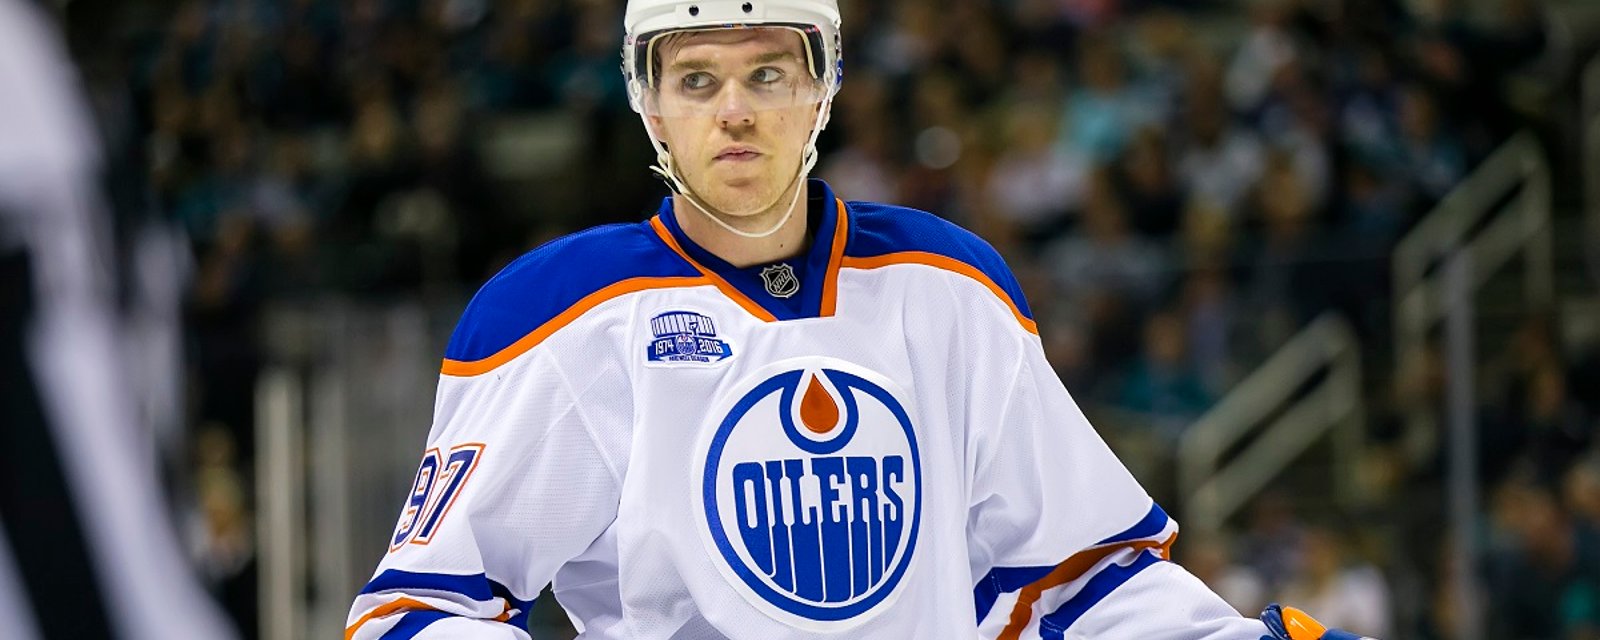 Oilers superstar Connor McDavid sends a message to fans after Game 7 loss.